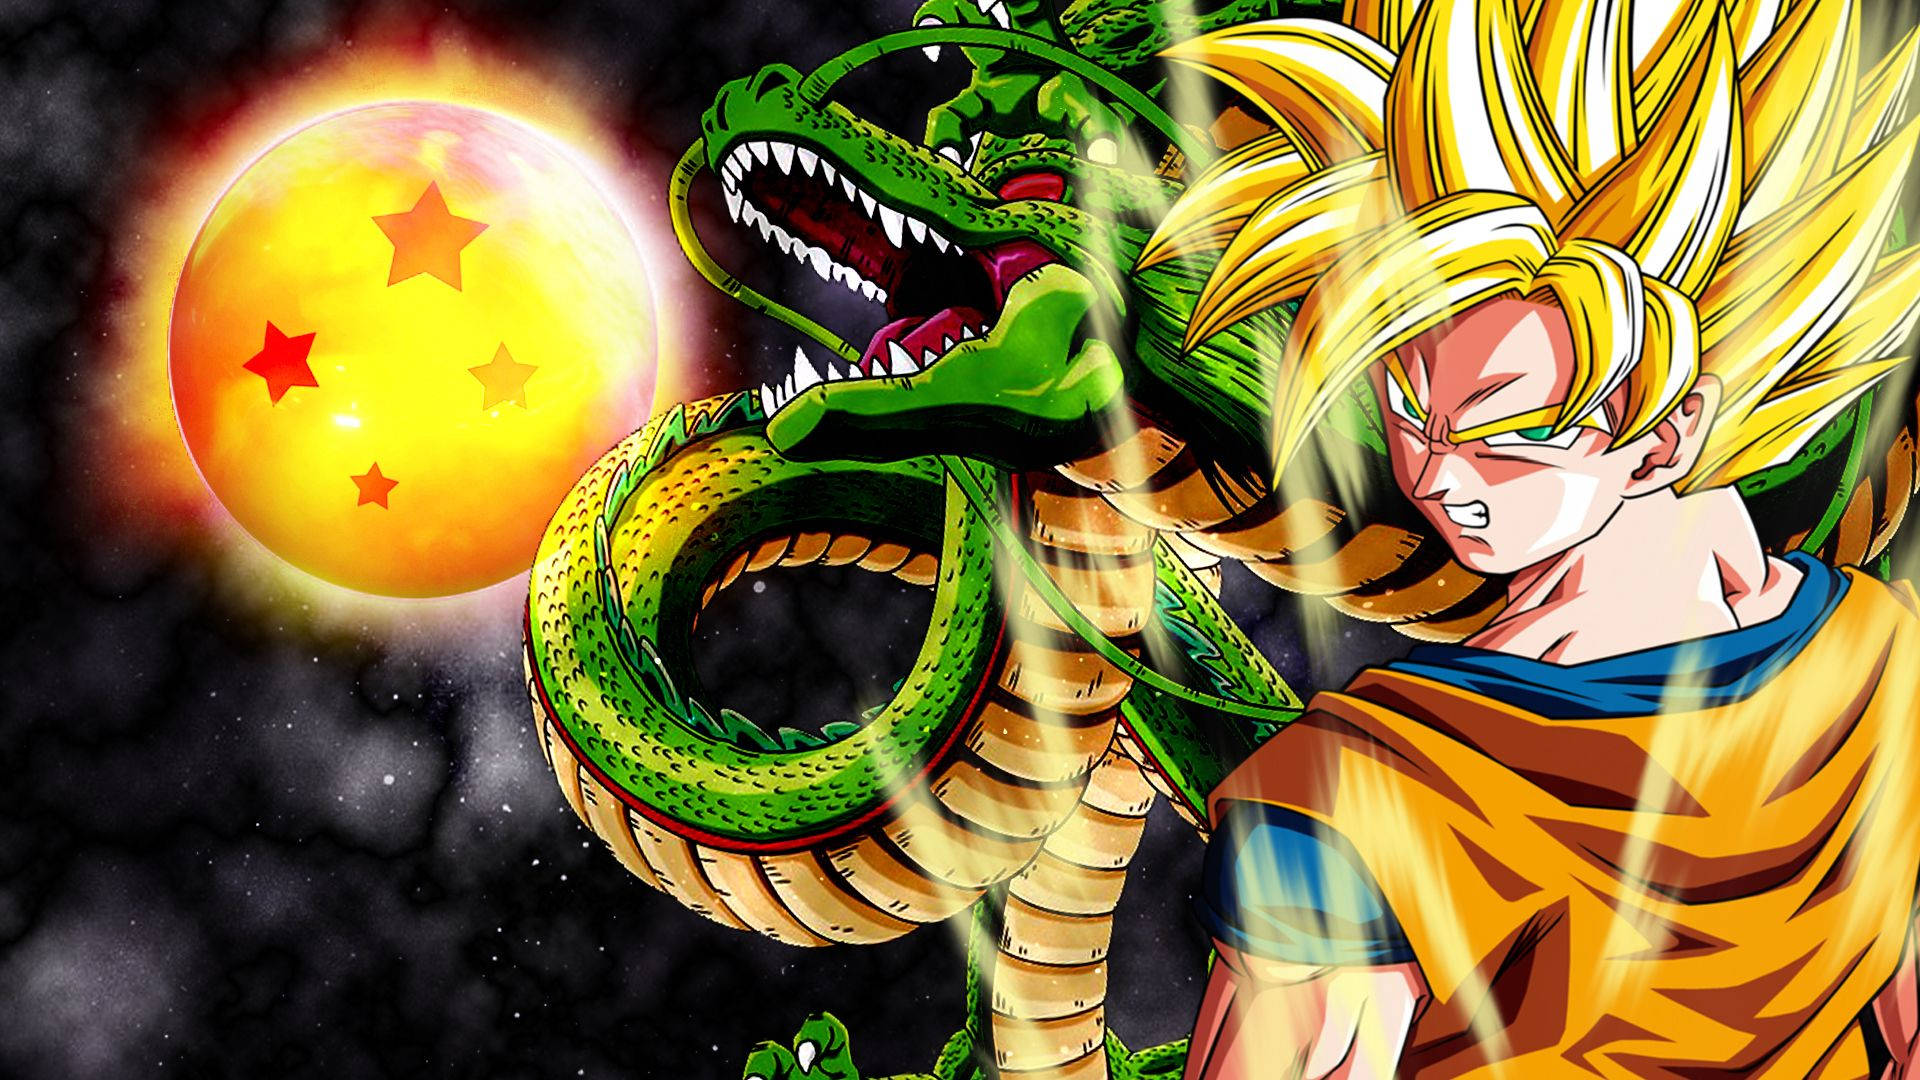 Follow The Journey of Goku and His Friends To Harness The Power Of Infinity Wallpaper